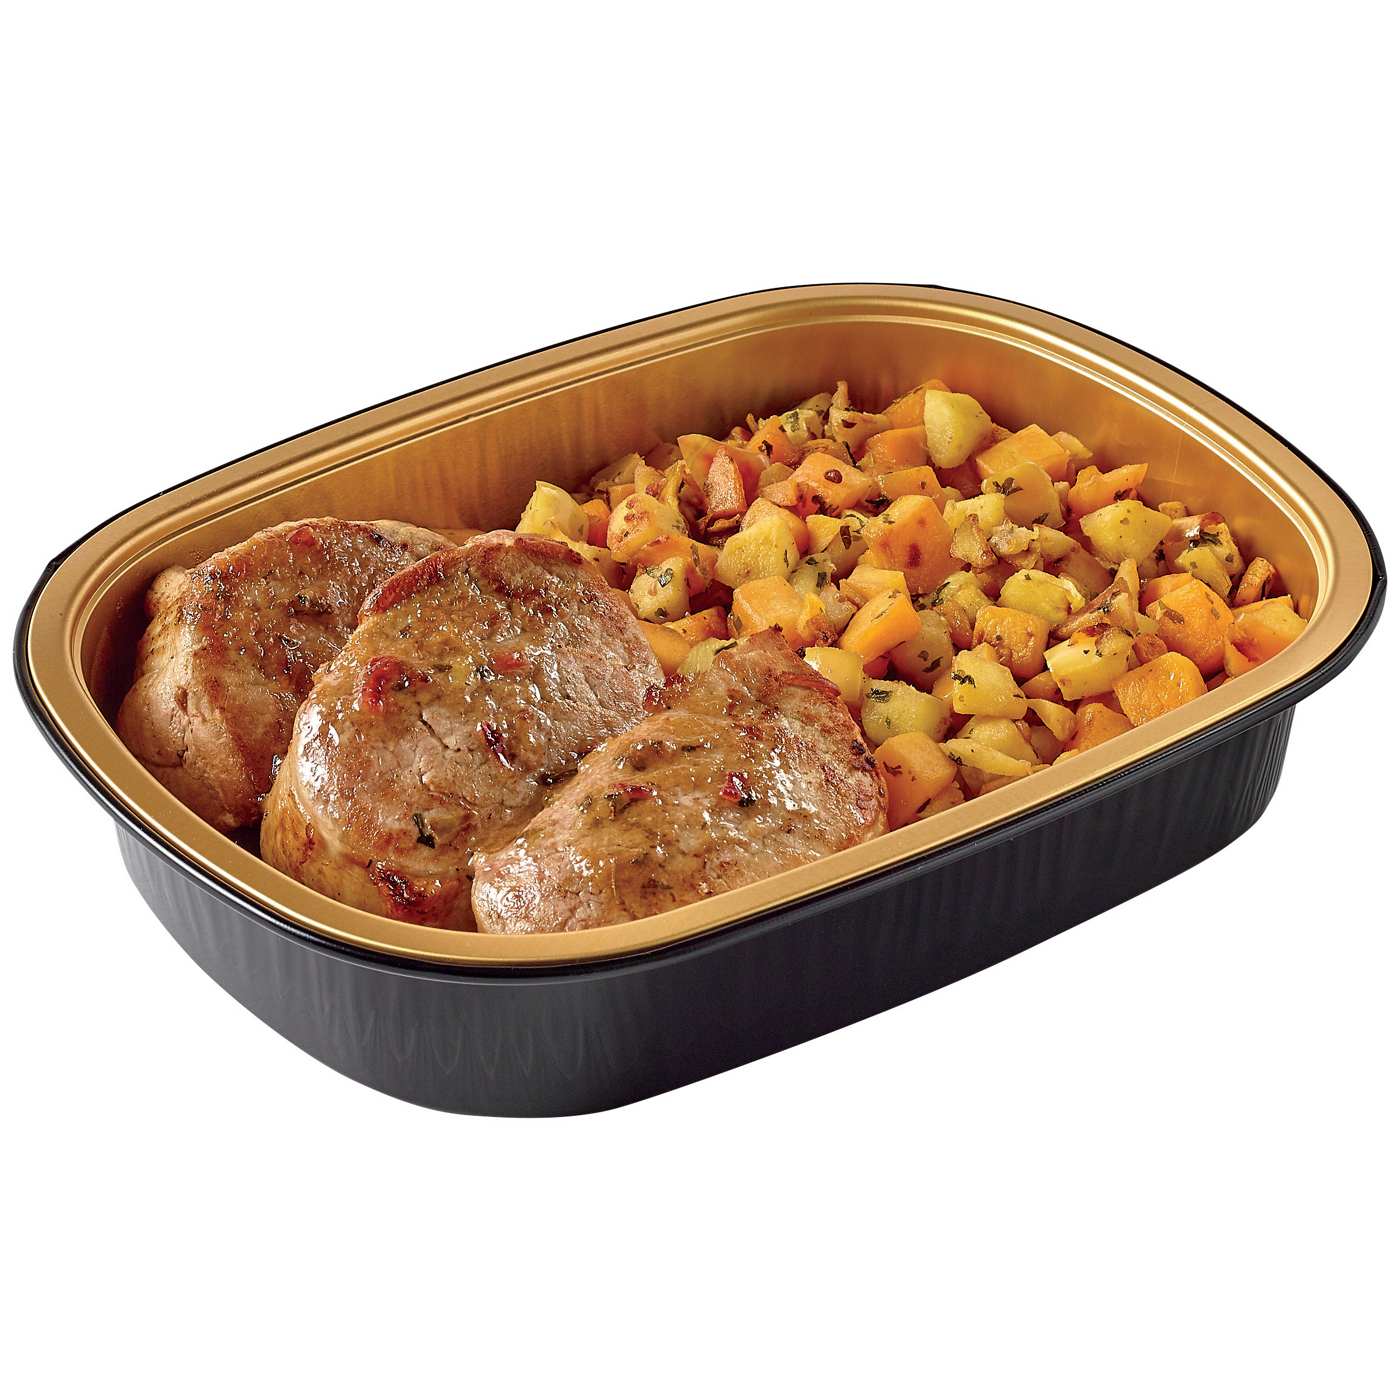 Meal Simple by H-E-B Pork Tenderloin with Pecan Praline Butternut Squash & Apples; image 4 of 4